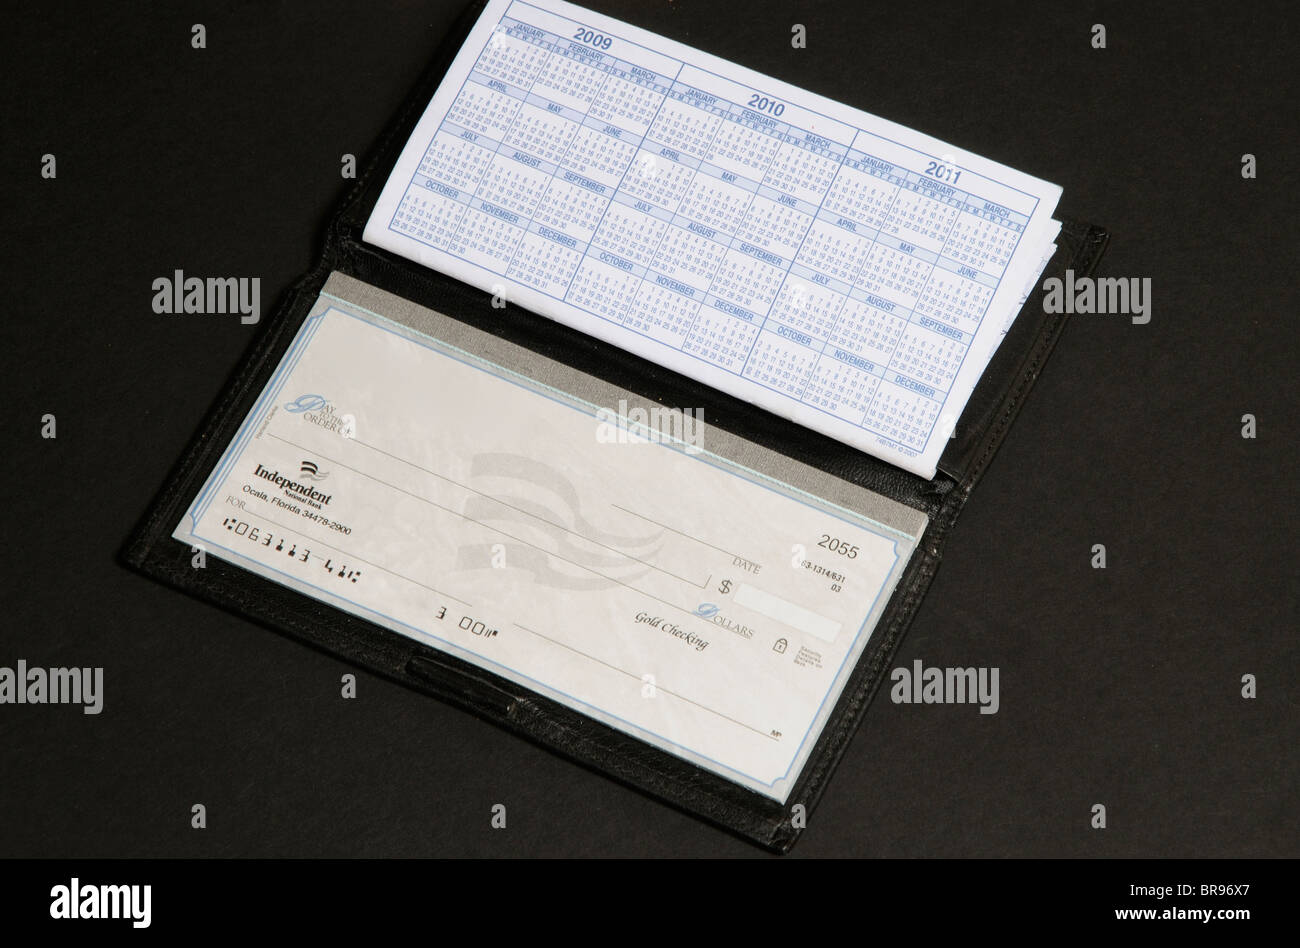 Dollar cheque book from Independent National Bank Florida USA Stock Photo